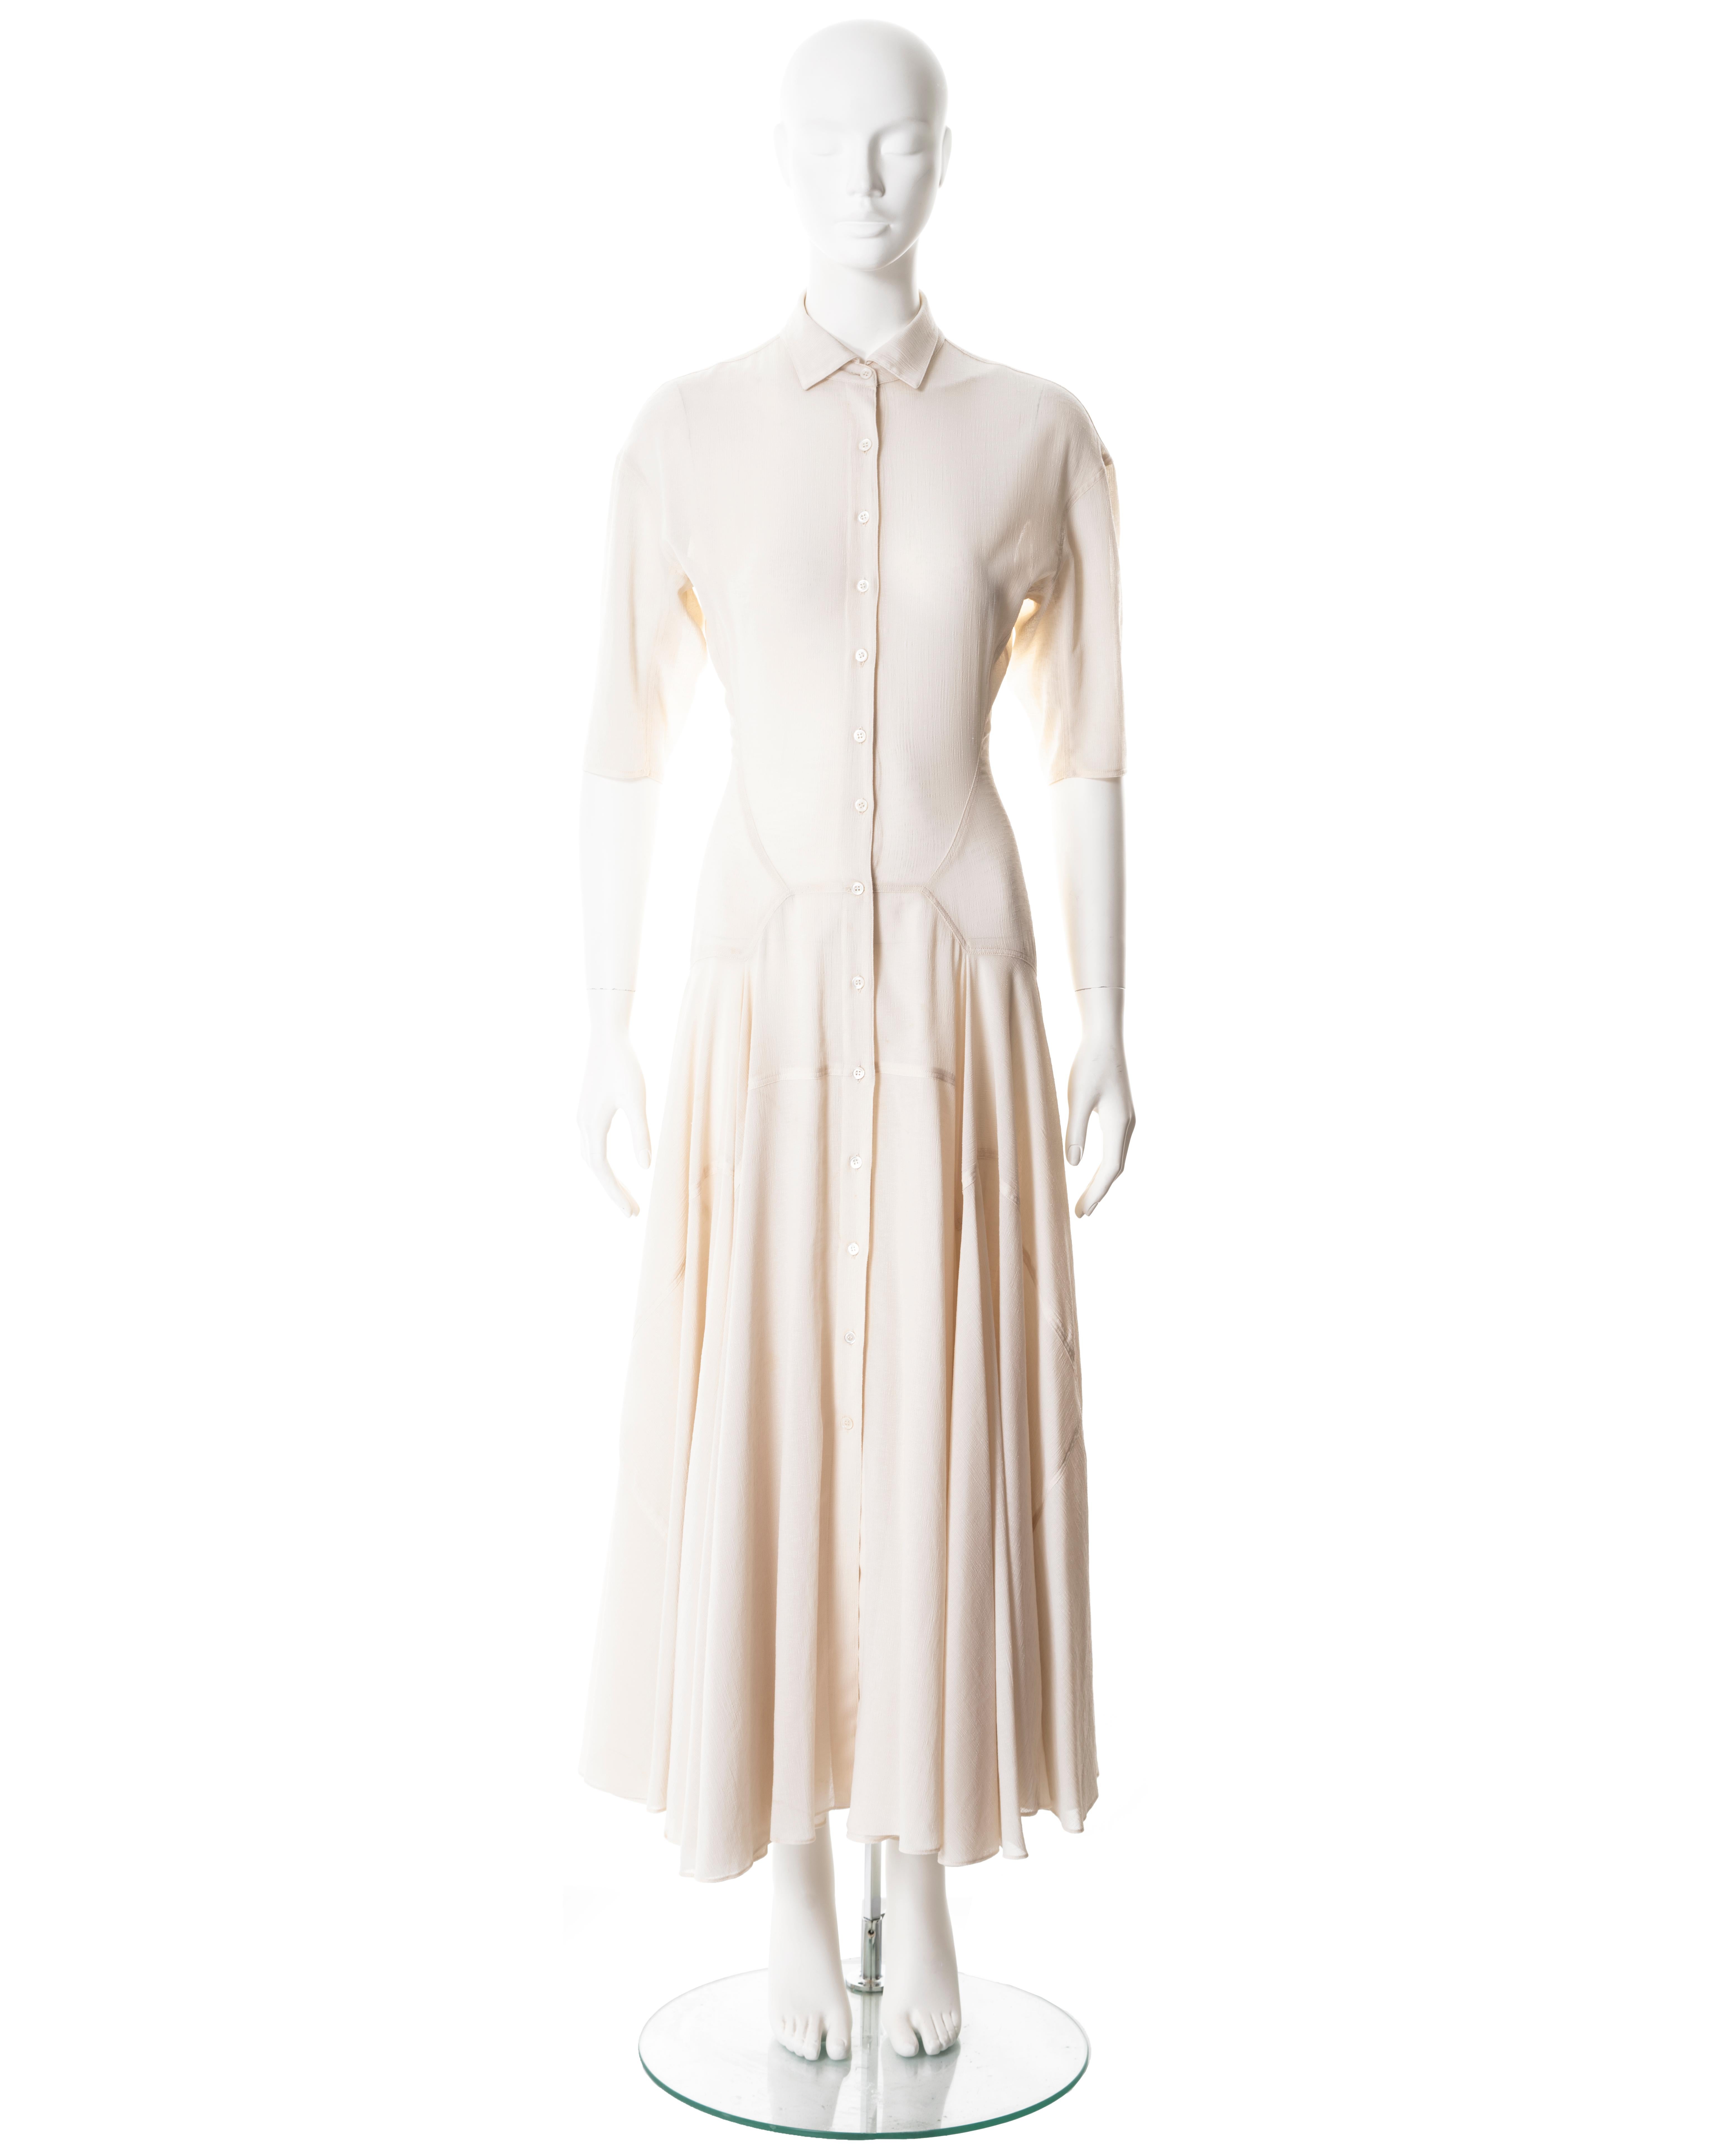 ▪ Azzedine Alaia button-up dress
▪ Sold by One of a Kind Archive
▪ Spring-Summer 1987
▪ Constructed from an ivory crinkled polyester 
▪ Classic shirt collar 
▪ Open front with button fastenings 
▪ Three-quarter length sleeves 
▪ Full ankle-length